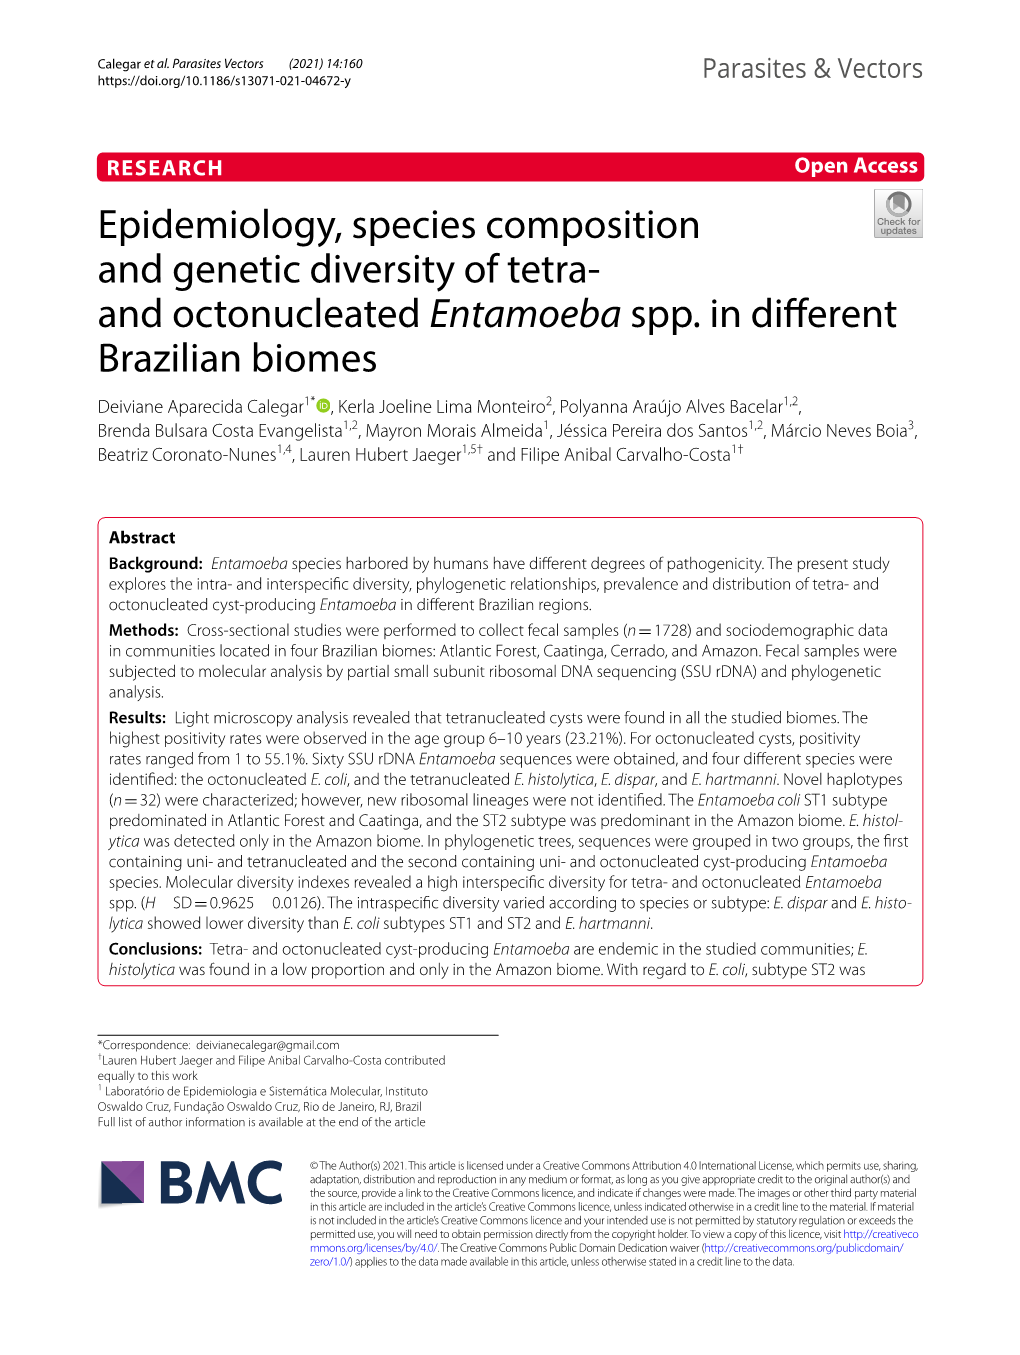 Epidemiology, Species Composition and Genetic Diversity of Tetra- and Octonucleated Entamoeba Spp. in Different Brazilian Biomes